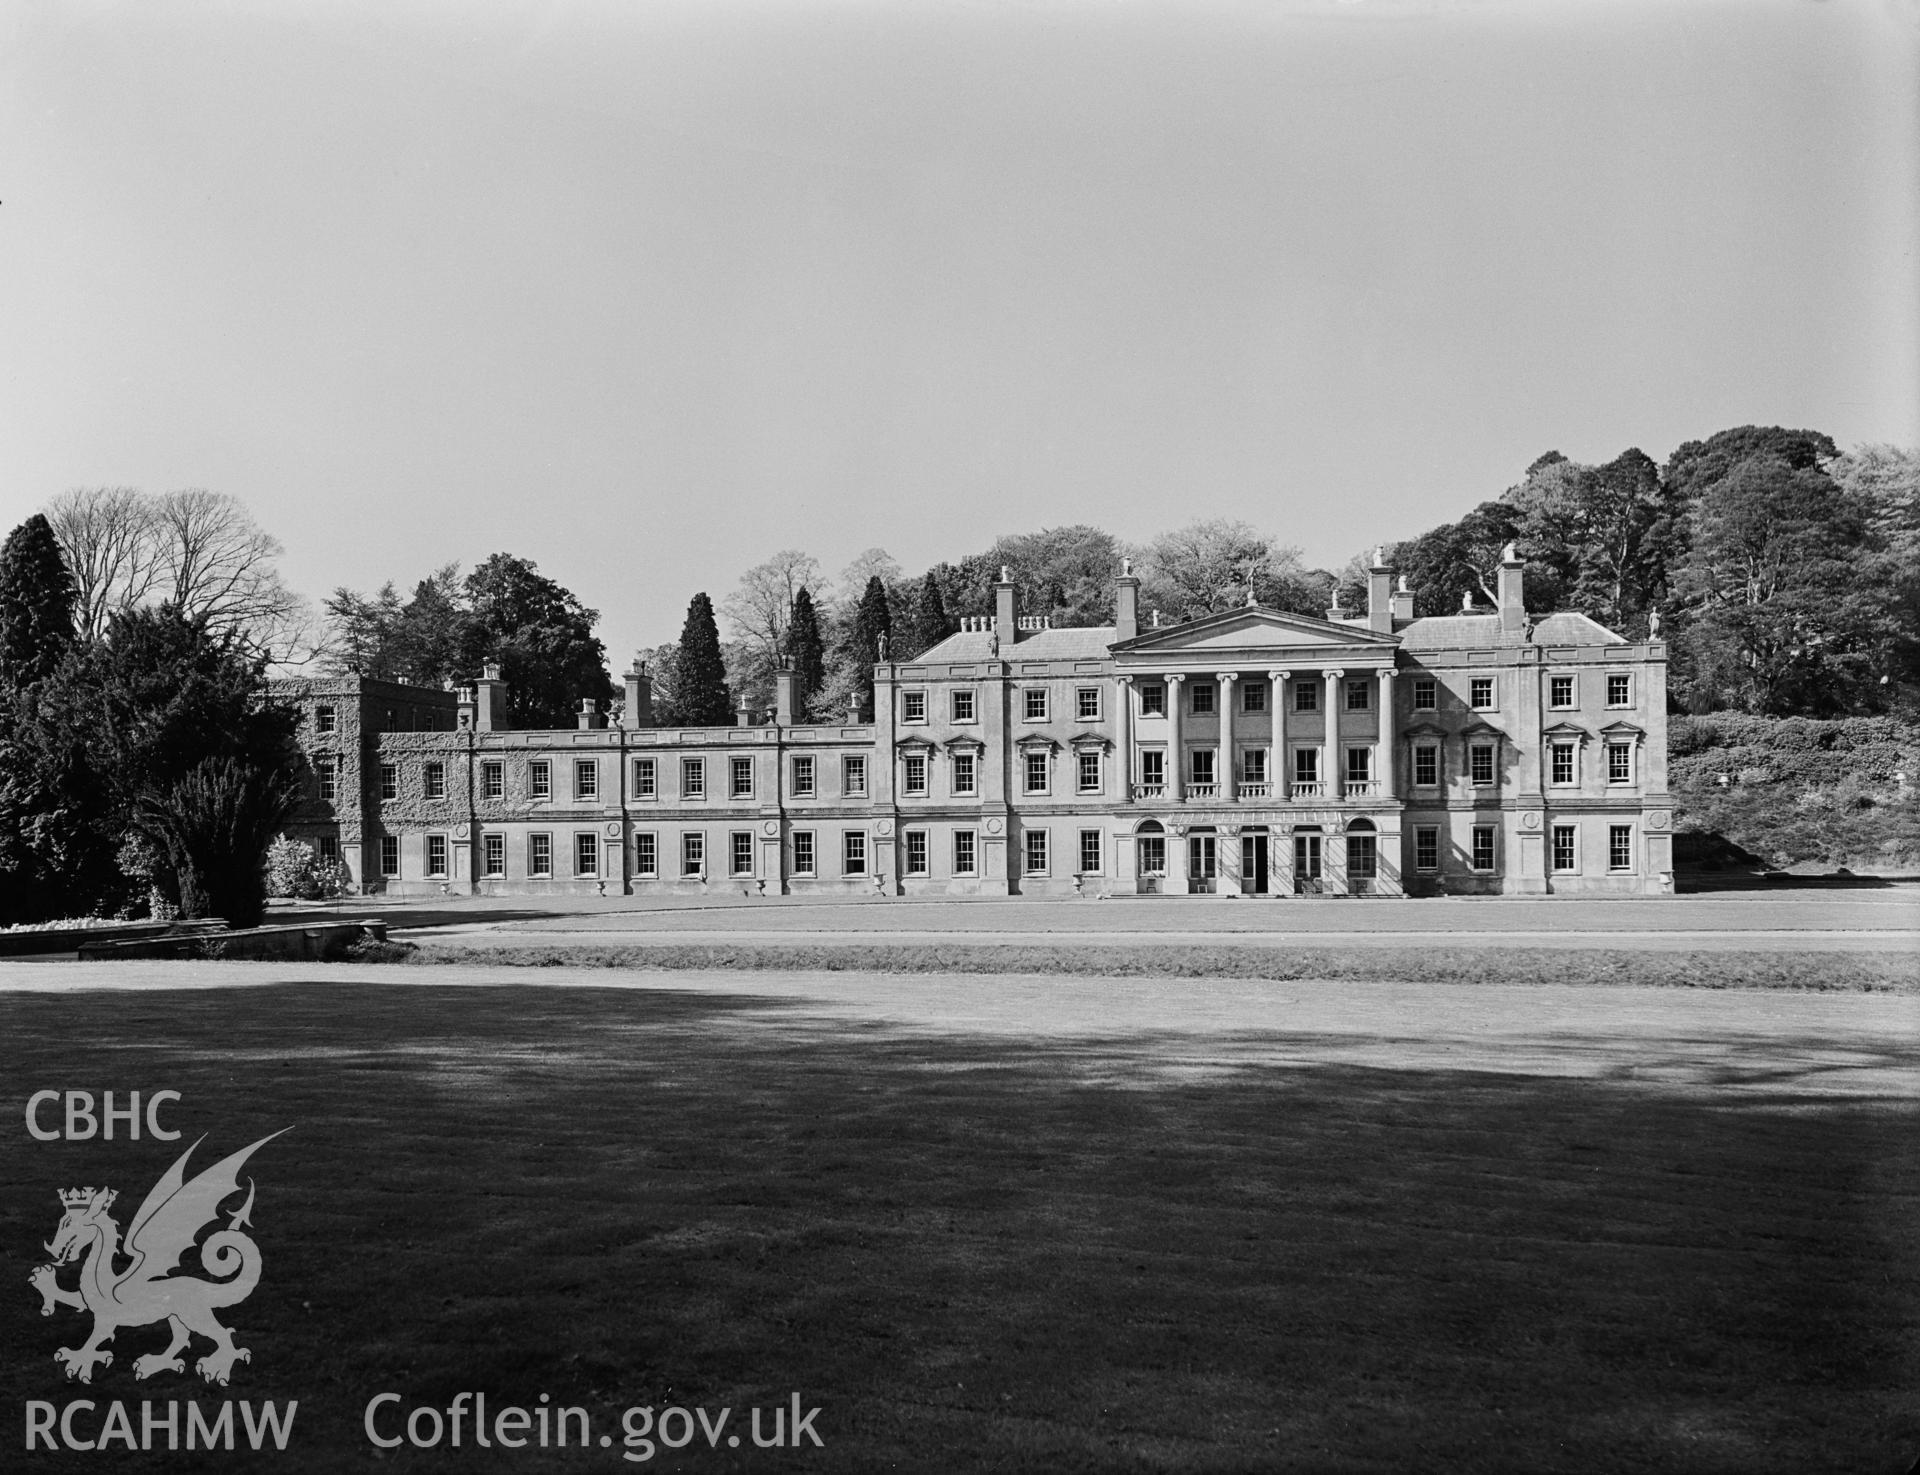 Exterior view of Glynllifon Hall from south